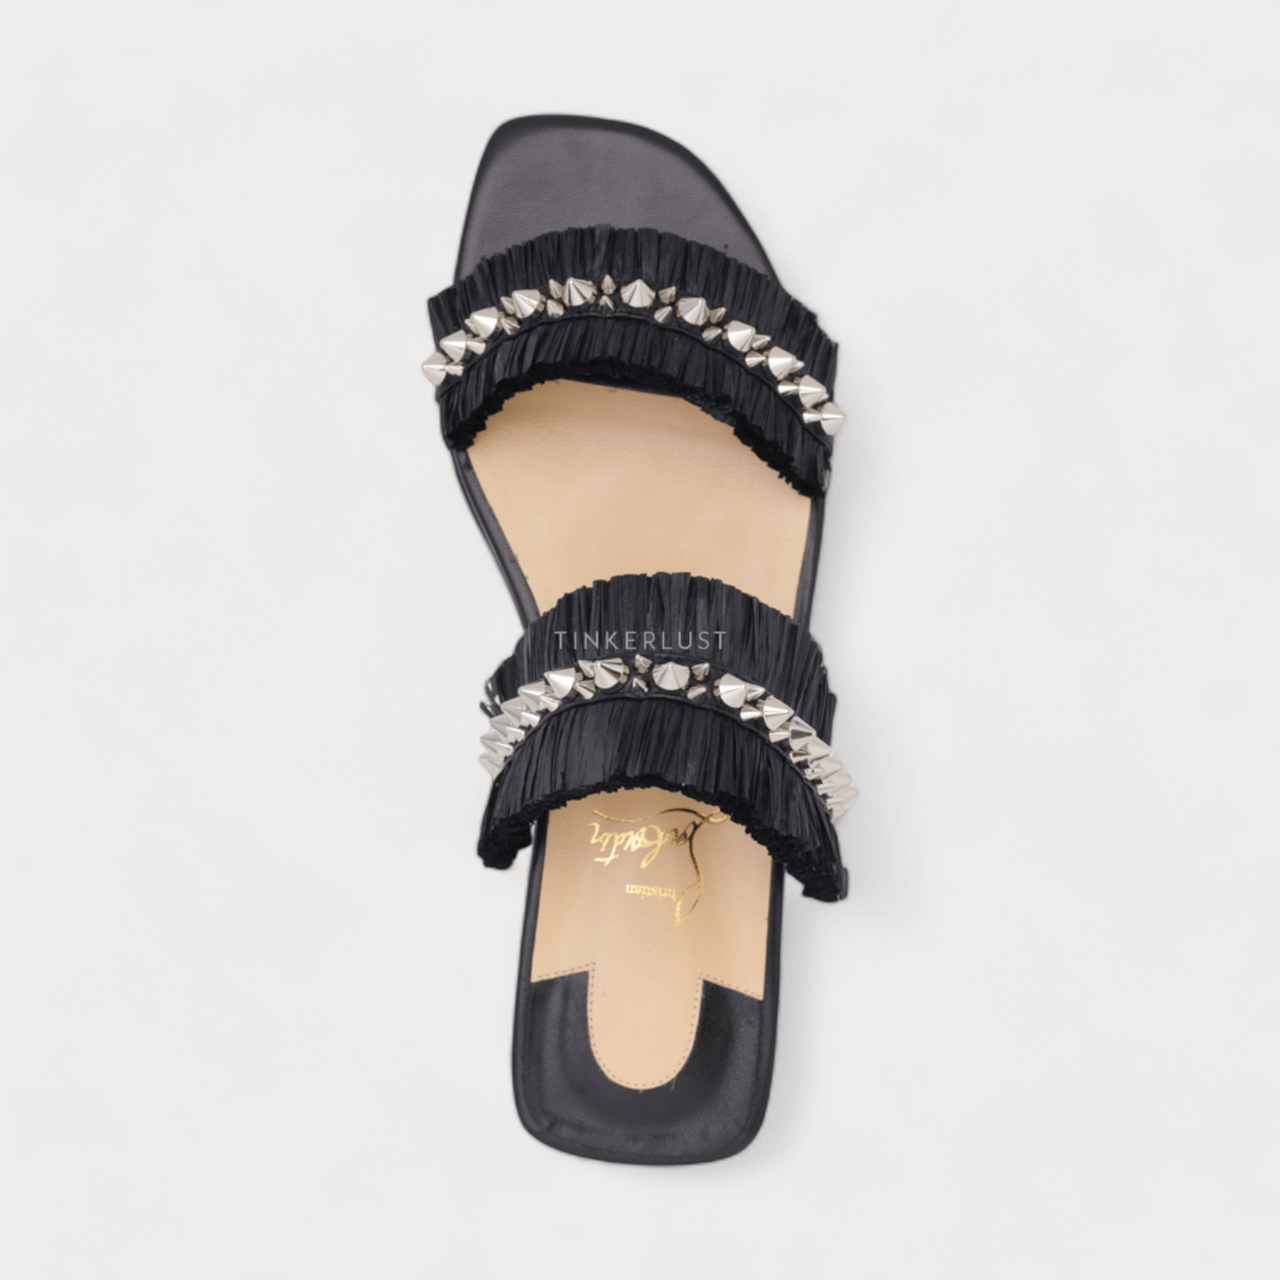 Christian Louboutin Marivodou Raffia Flat Sandals in Black with Silver Spikes 